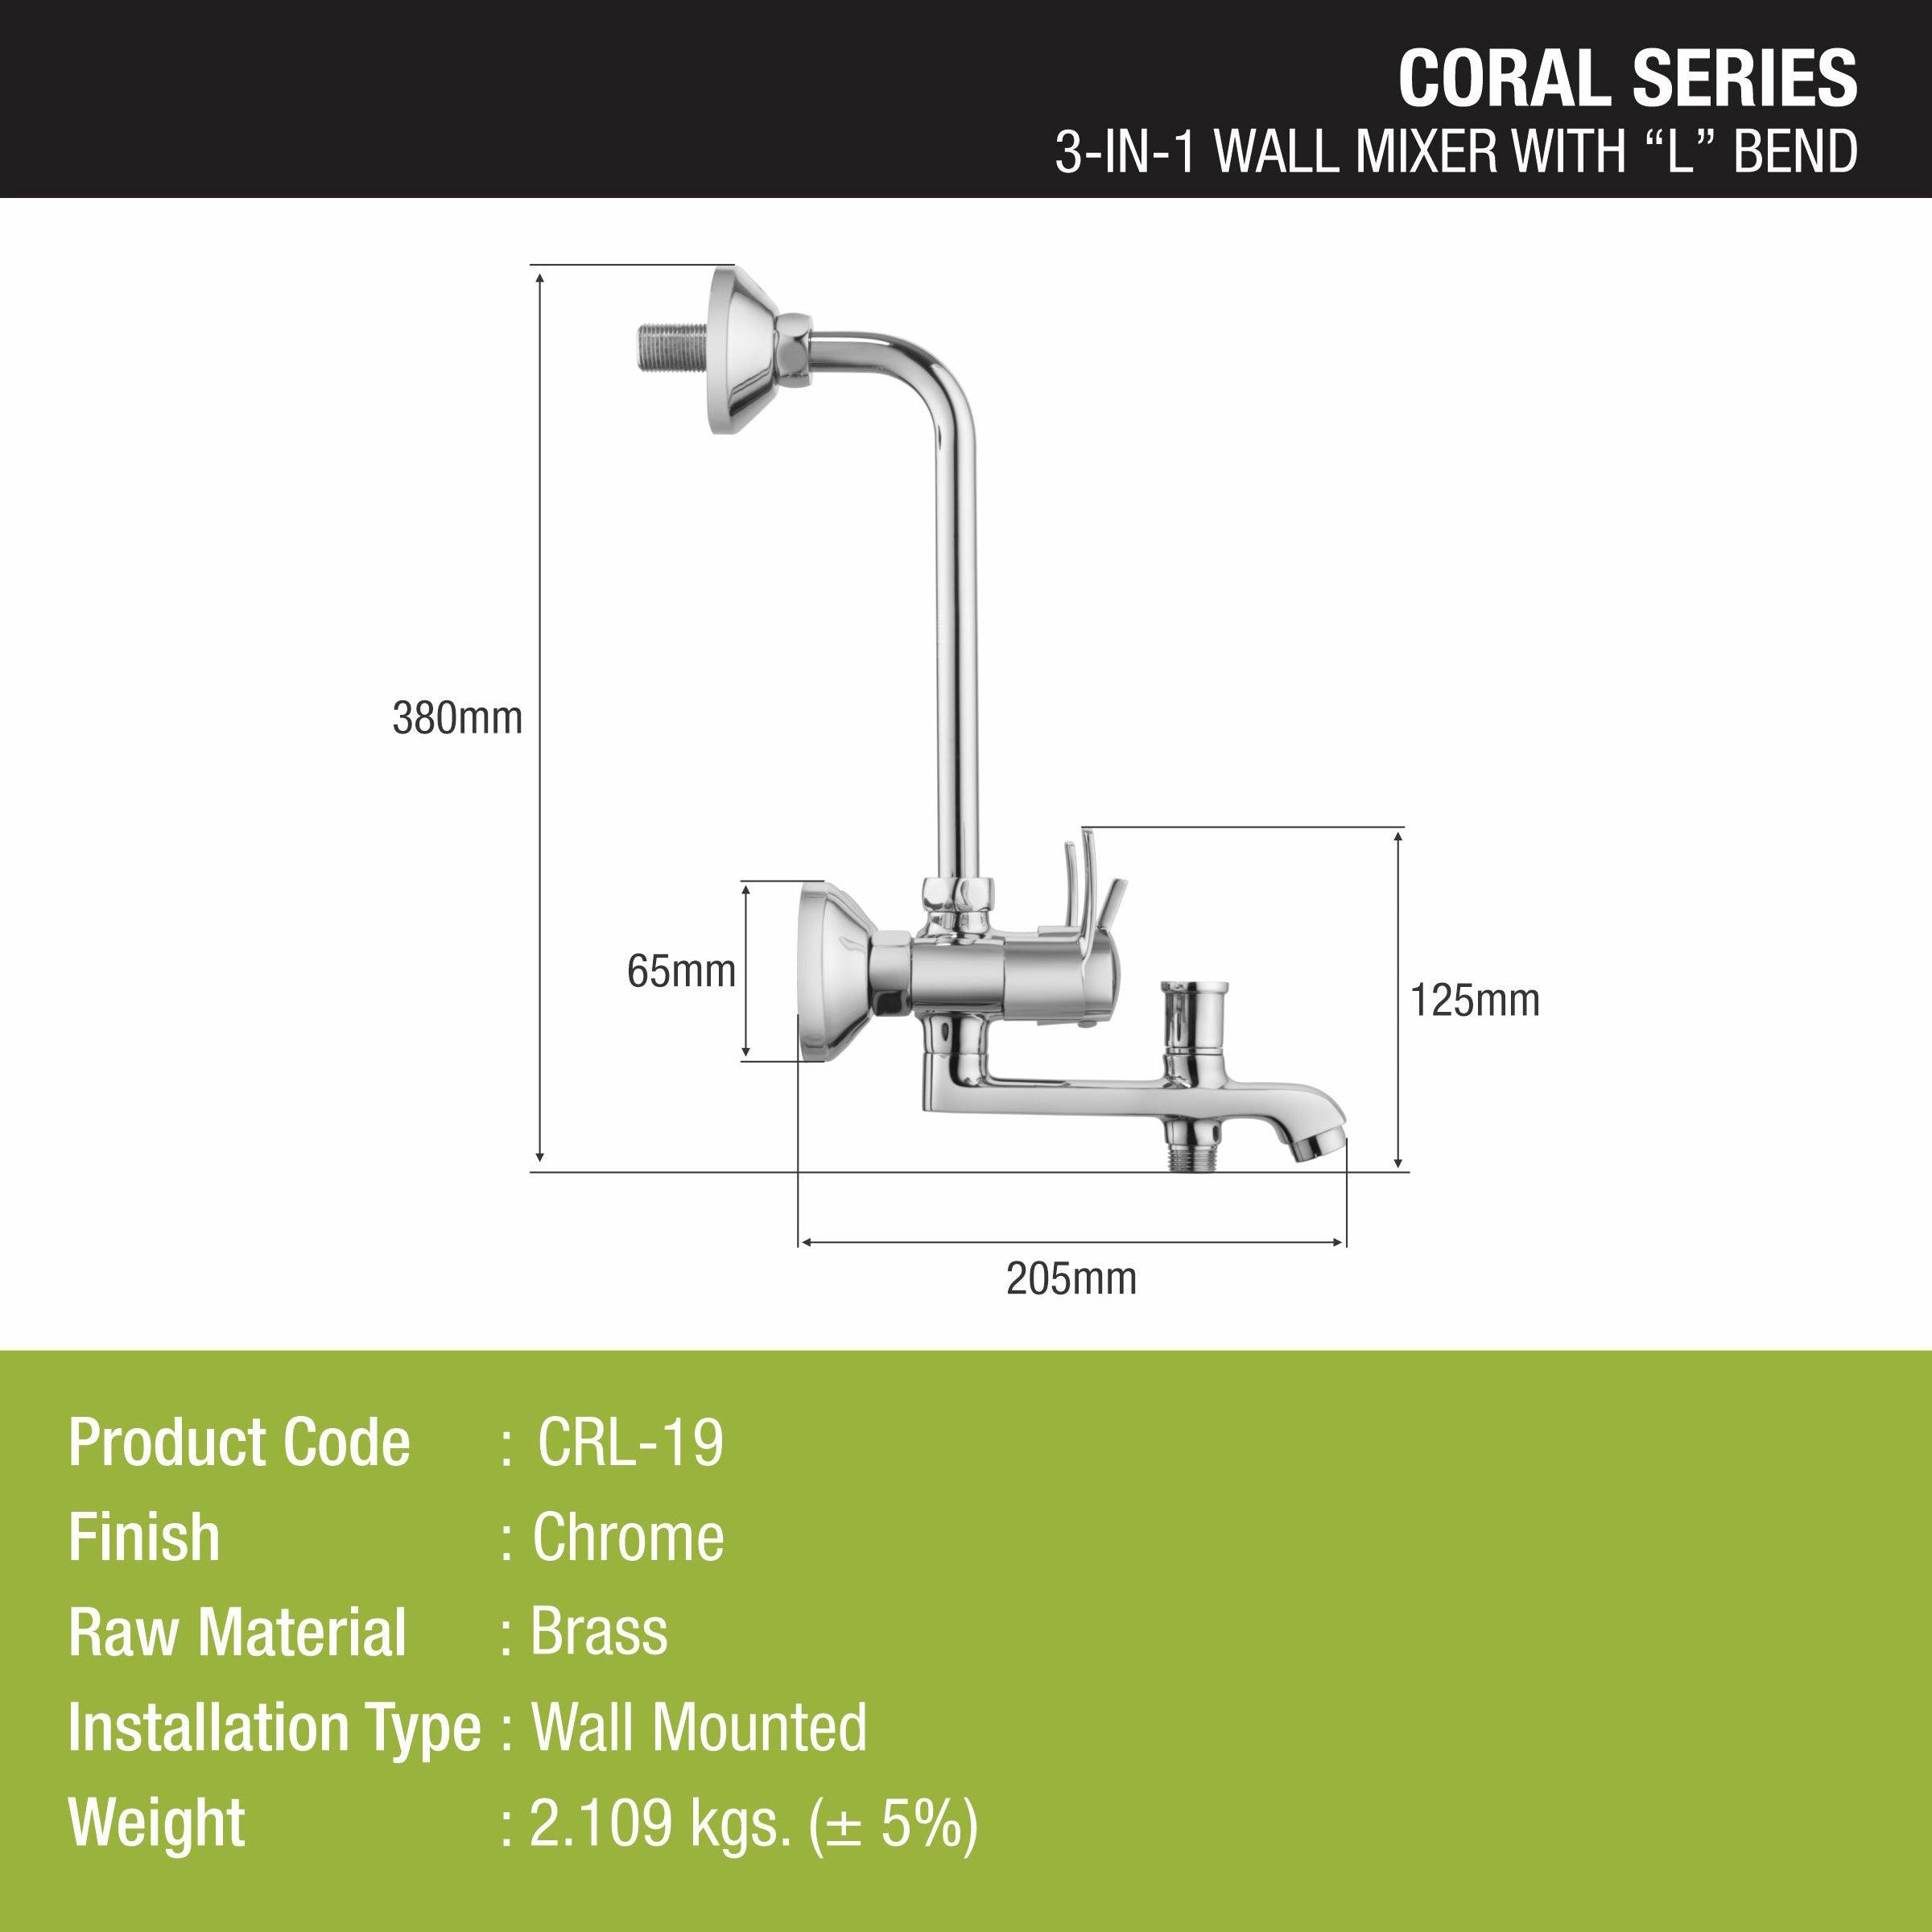 Coral 3 in 1 Wall Mixer Brass Faucet with L Bend - LIPKA - Lipka Home